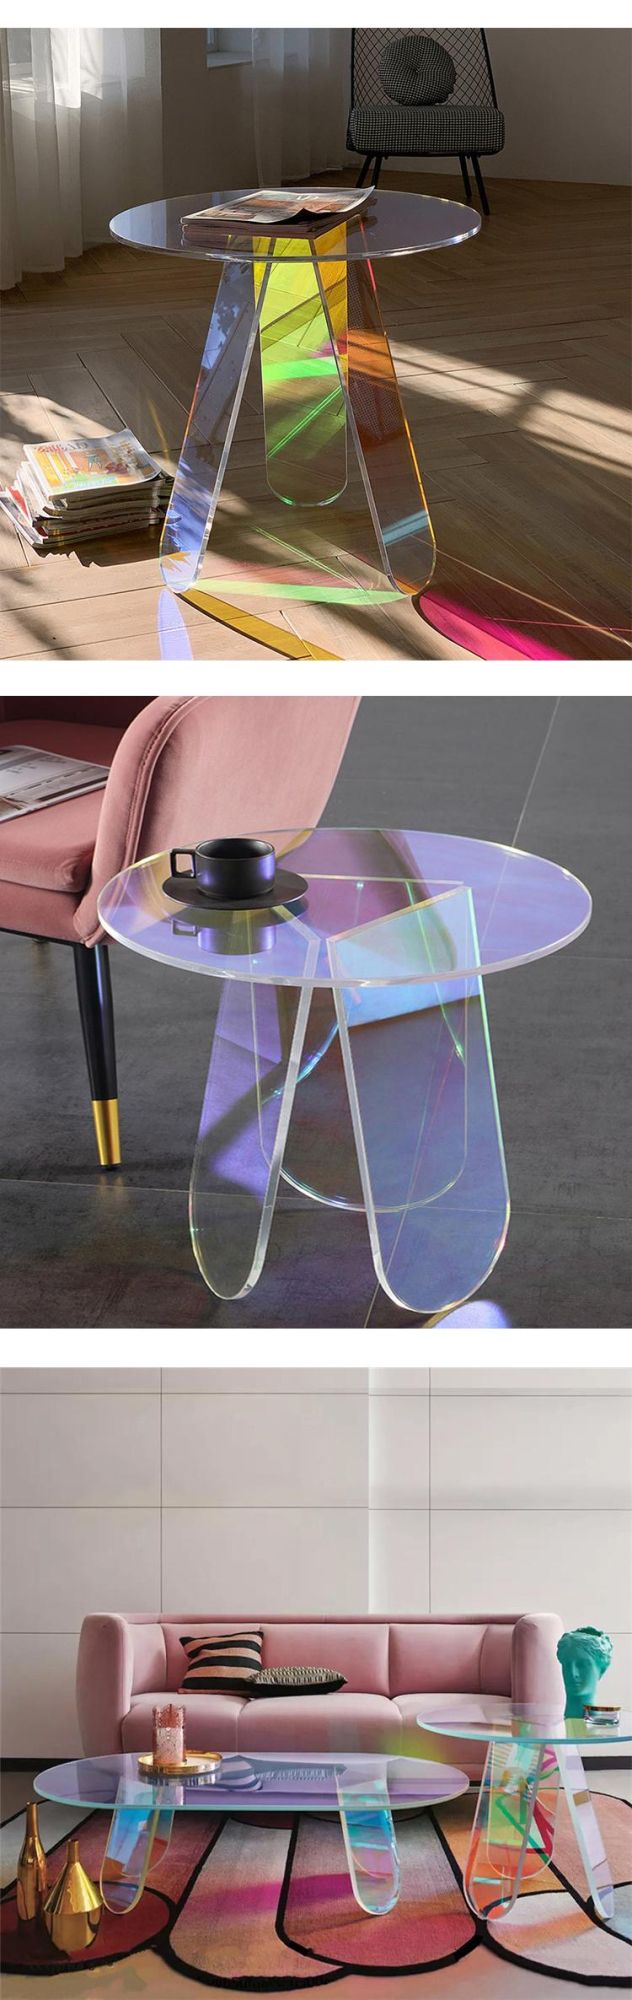 Modern Round Coffee Table Living Room Acrylic Smart Coffee Table for Home Decor